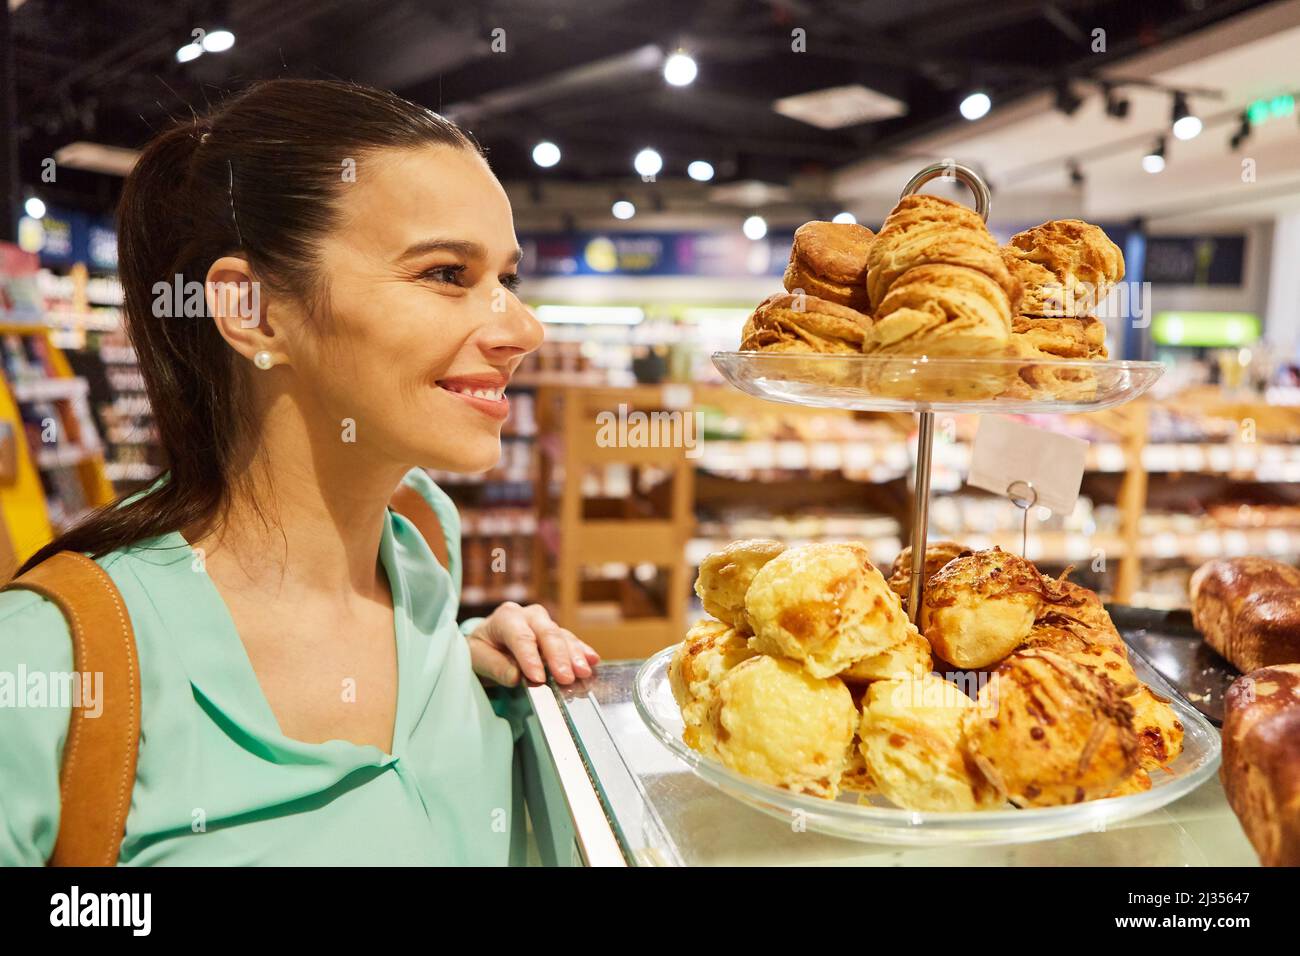 Young woman as a smiling customer looks at a shelf with a selection of baked goods in the supermarket Stock Photo